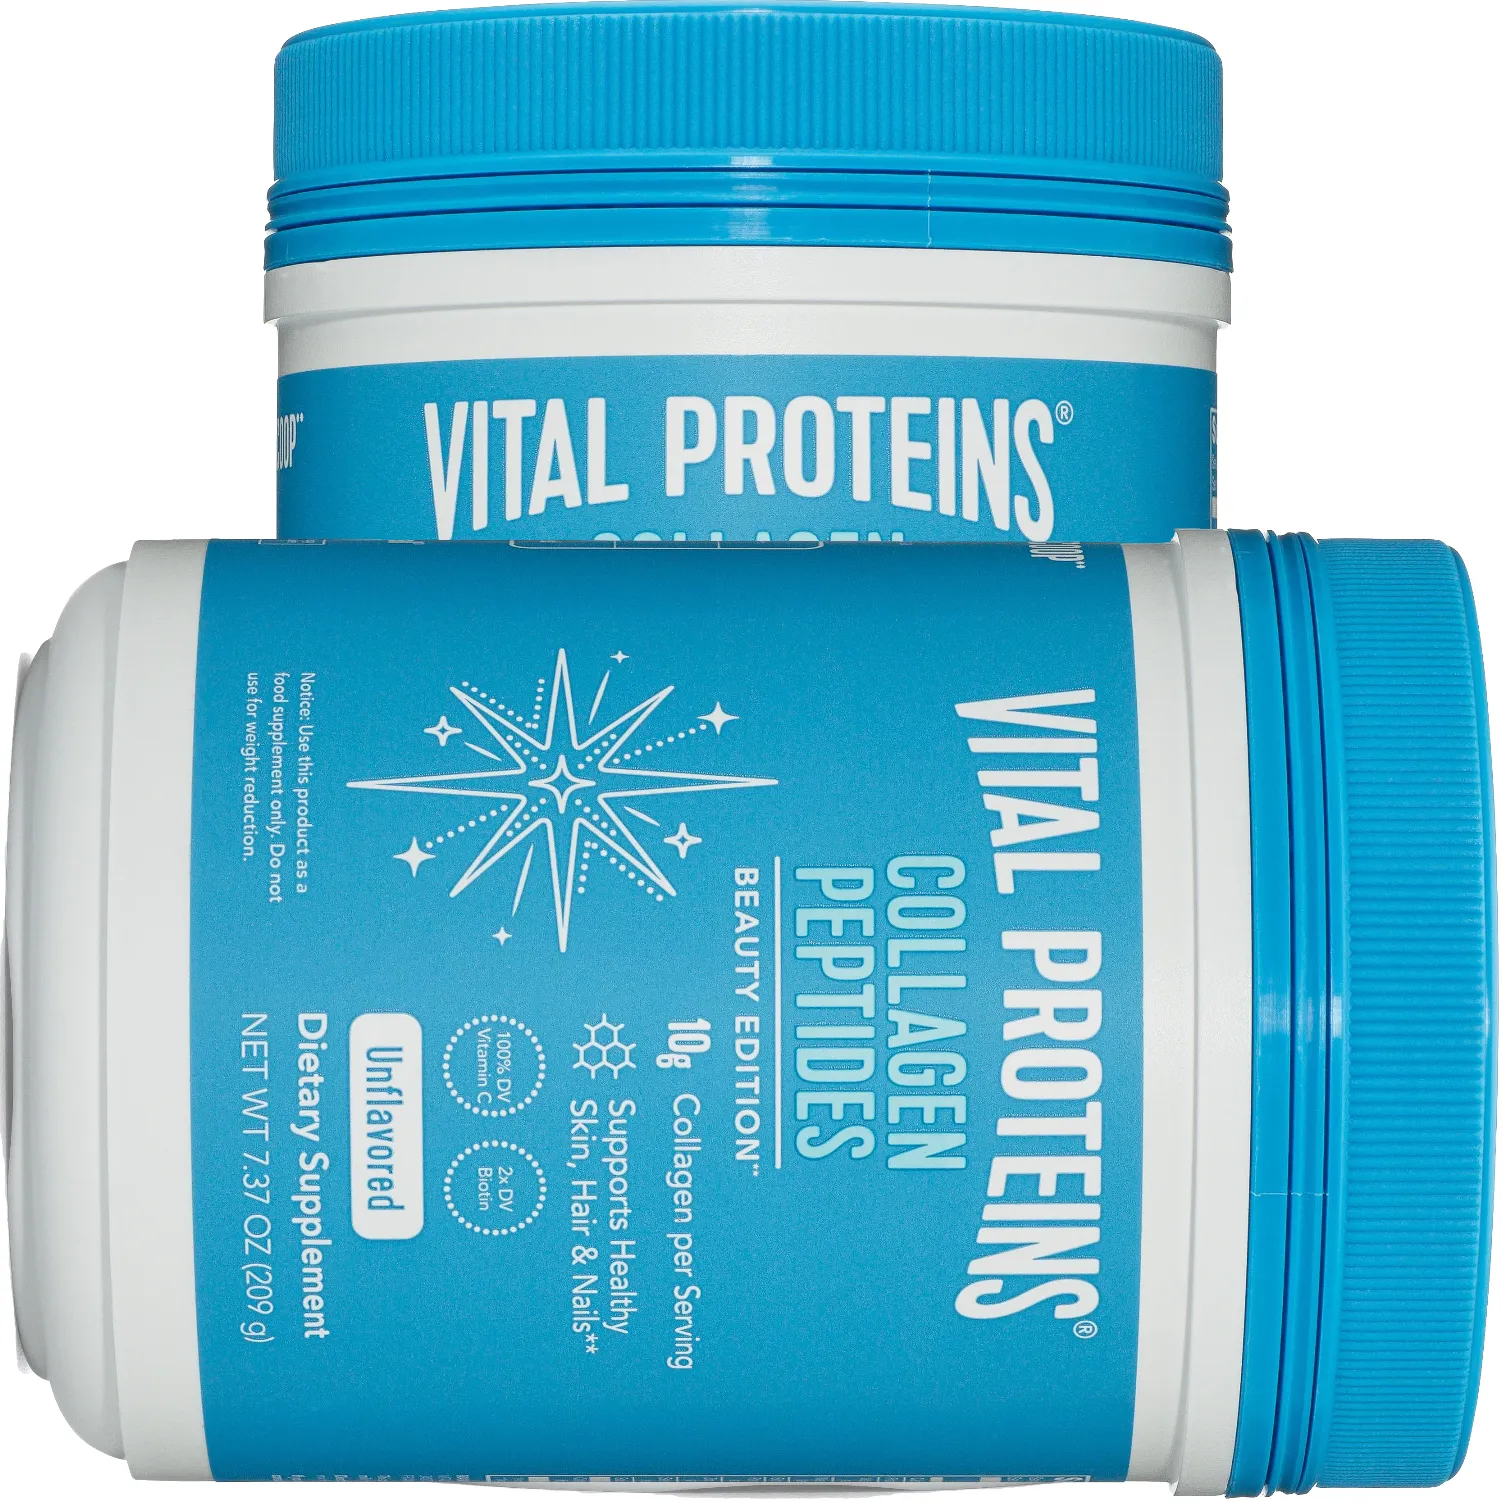 Free Vital Proteins Health Supplements